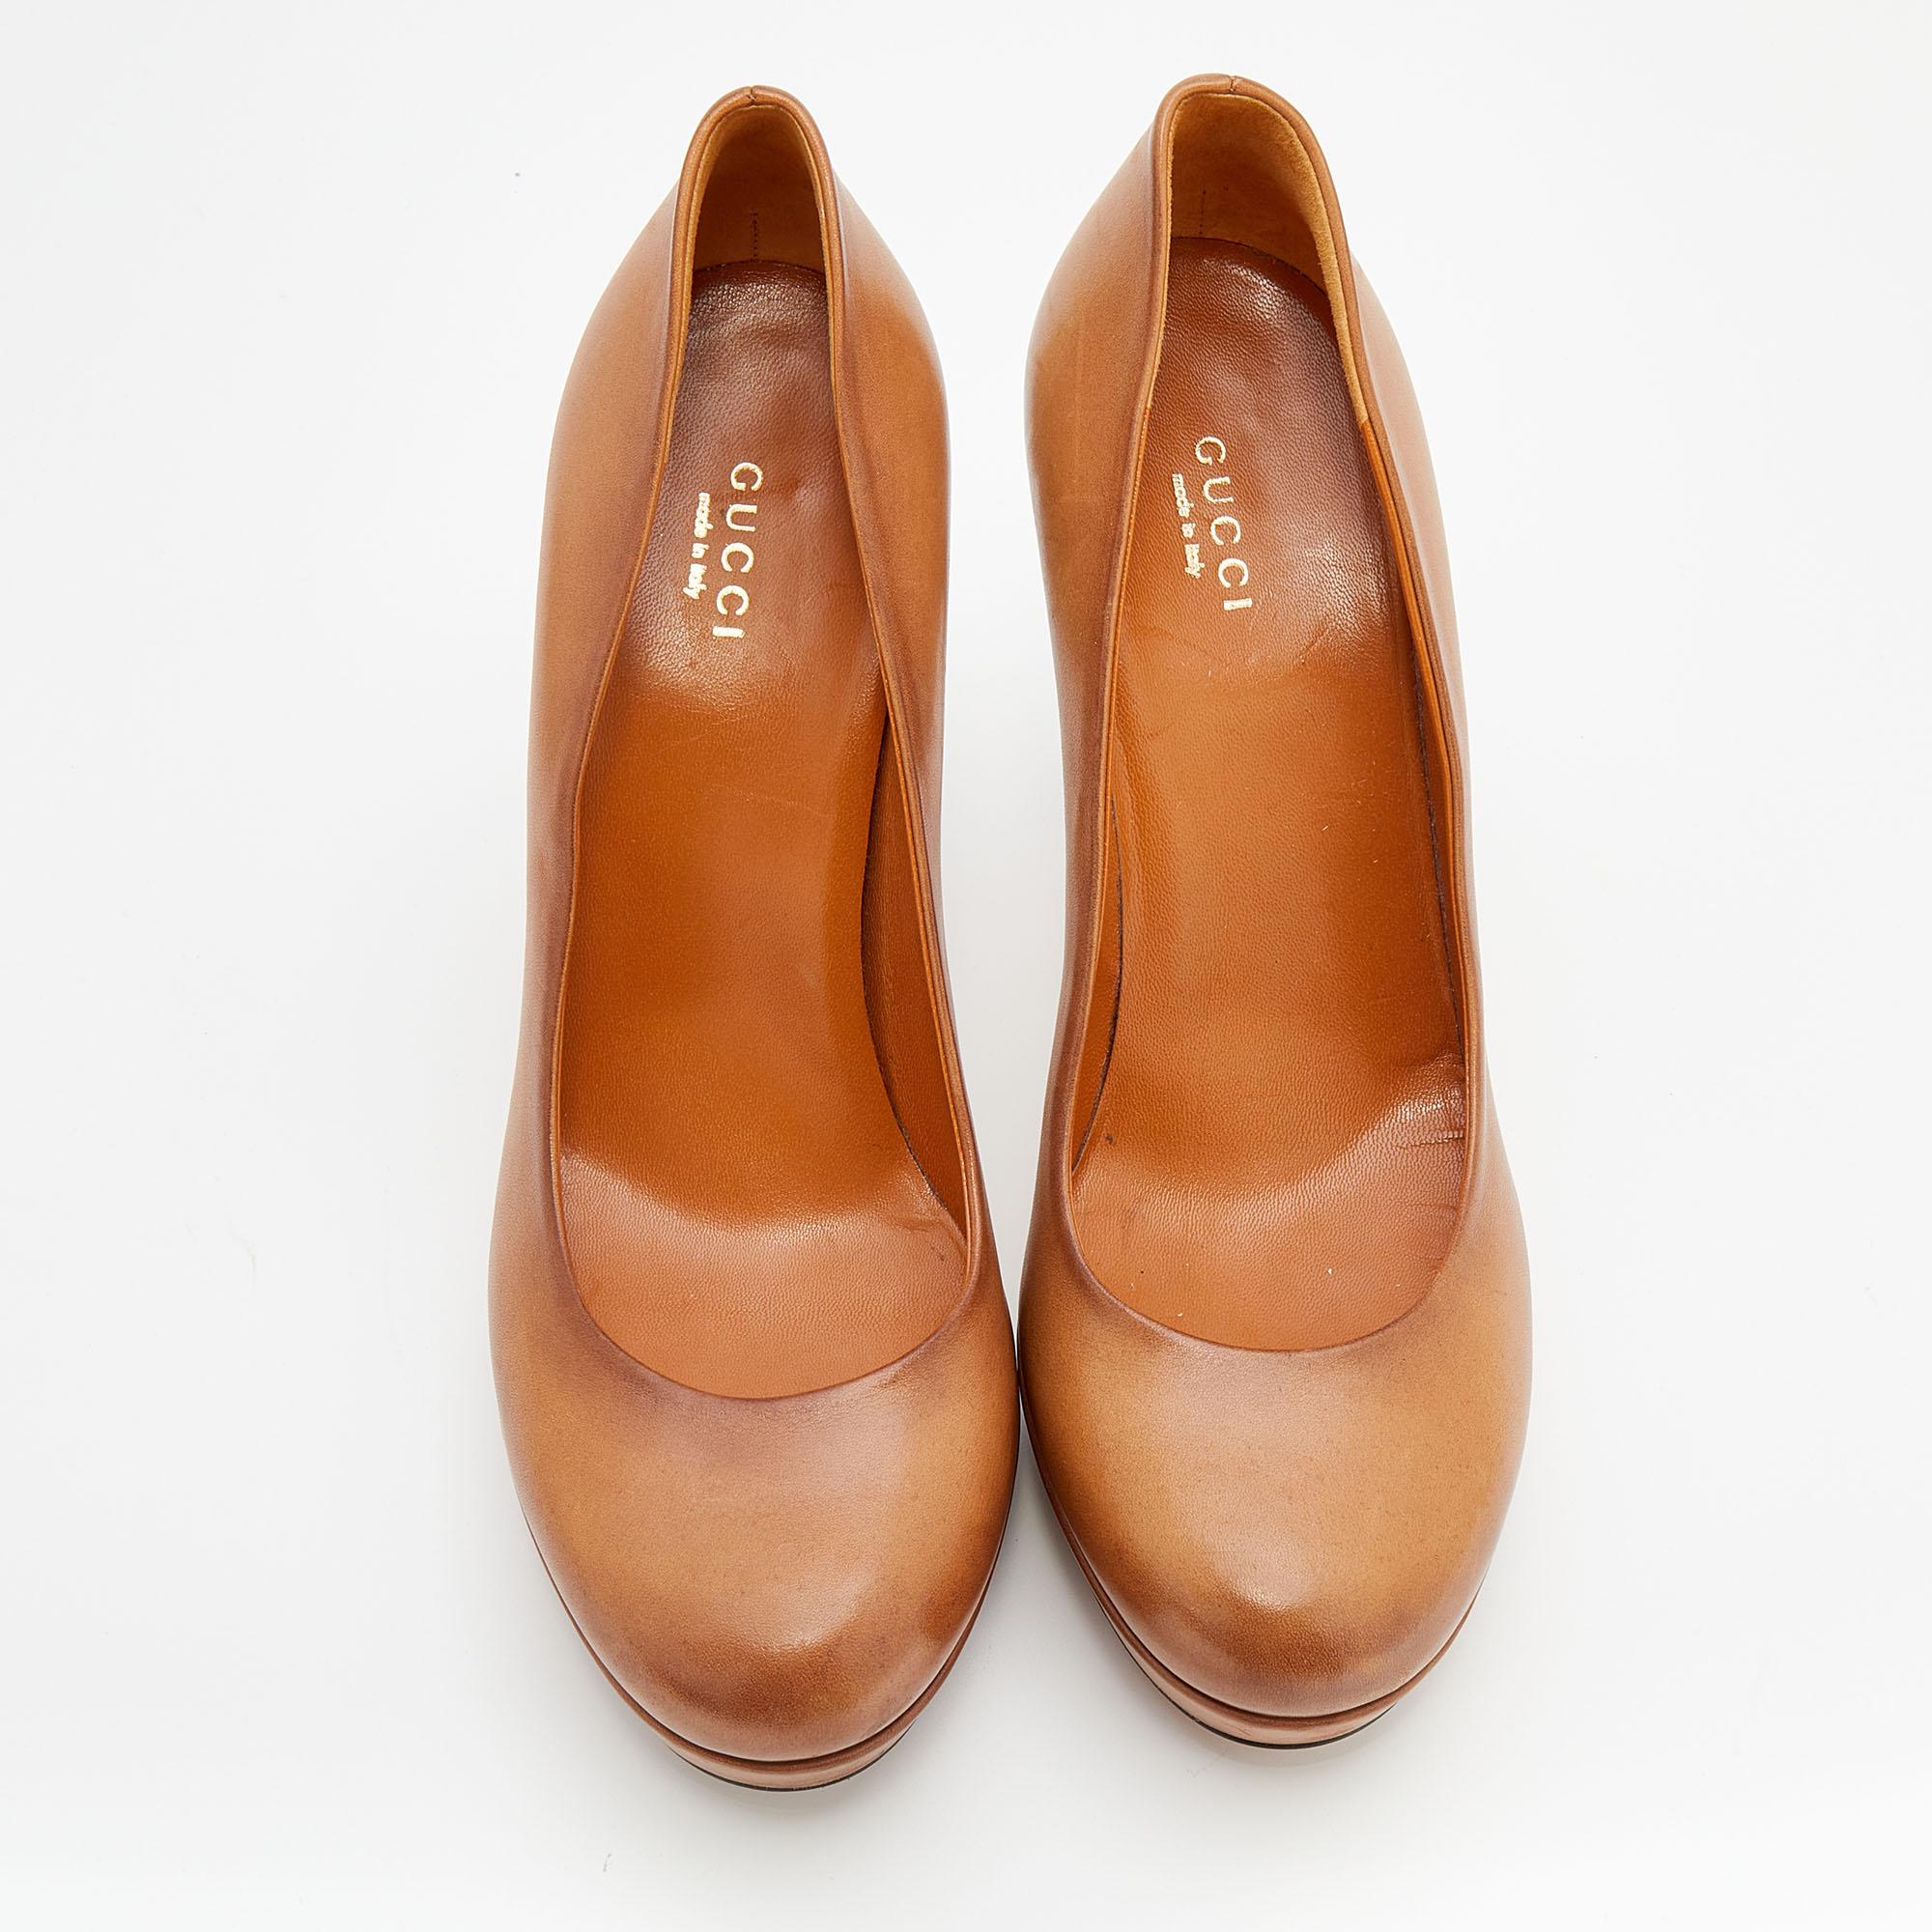 This amazing pair of pumps from Gucci is sure to add some class to your outfits. The round-toe pumps have been crafted from brown leather and they come with comfortable insoles. They are complete with 11.5 cm heels and solid platforms that offer